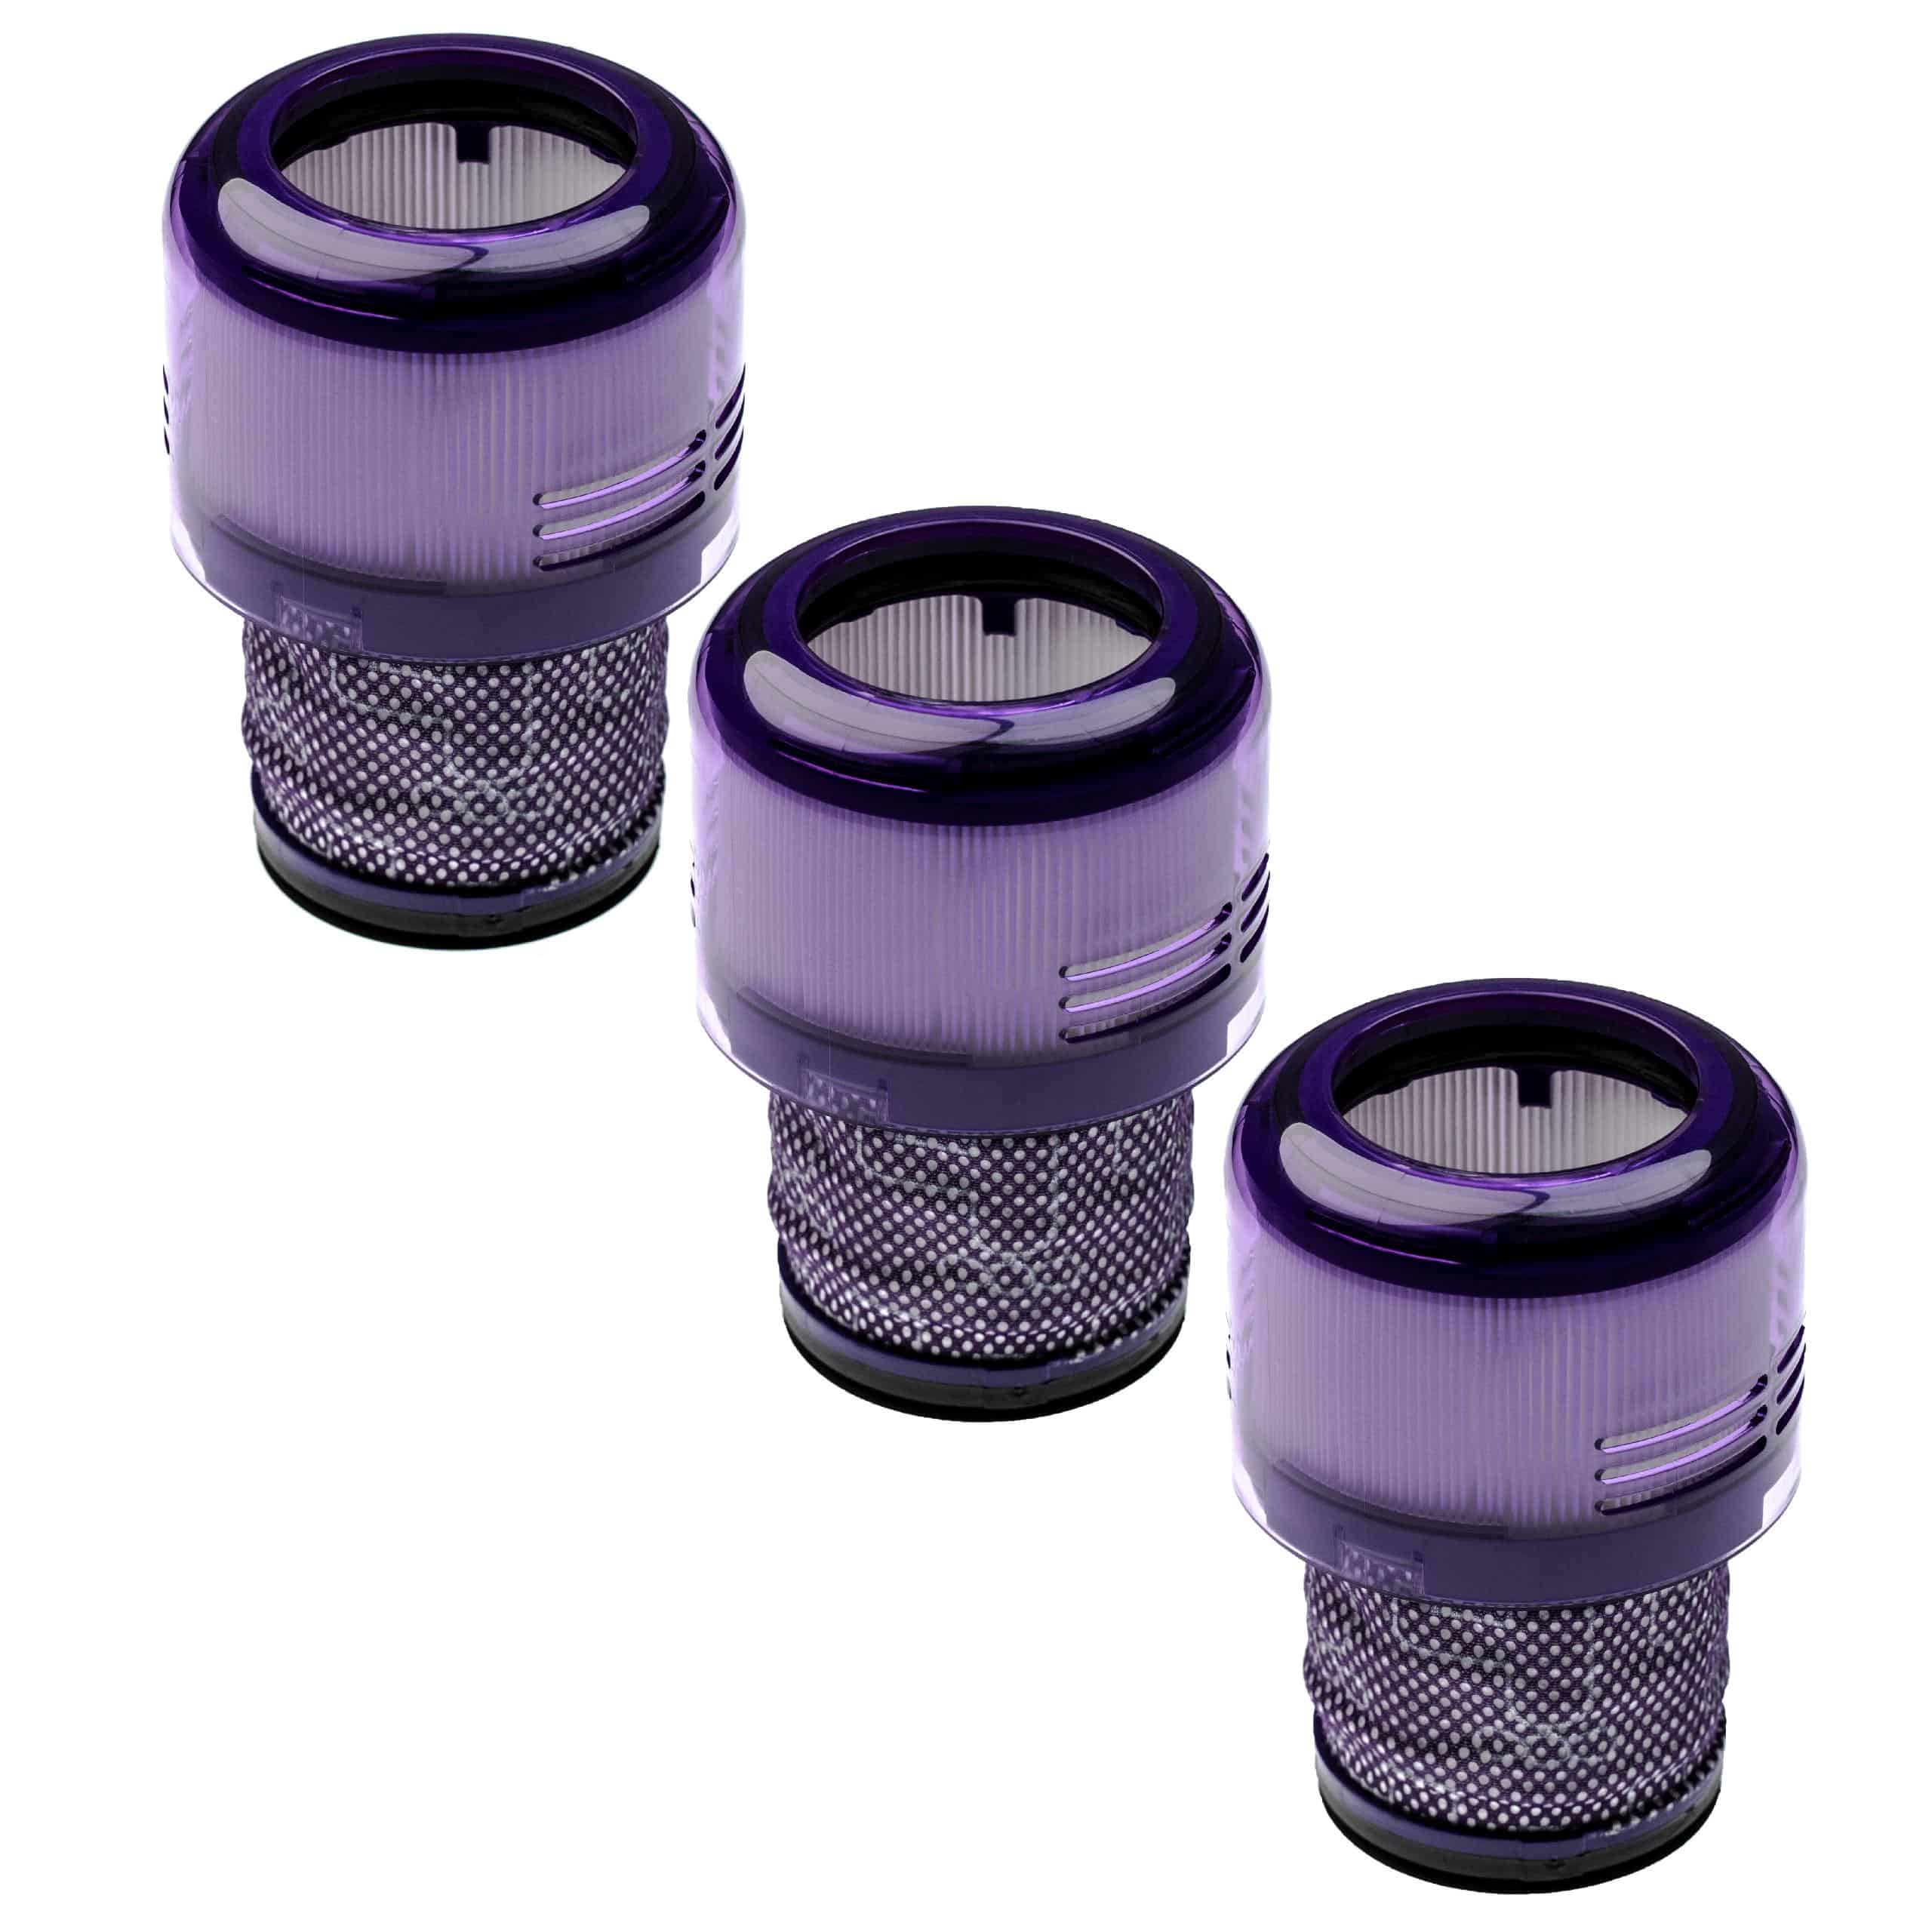 3x dust filter replaces Dyson 97001302, 970013-02 for Dyson Vacuum Cleaner